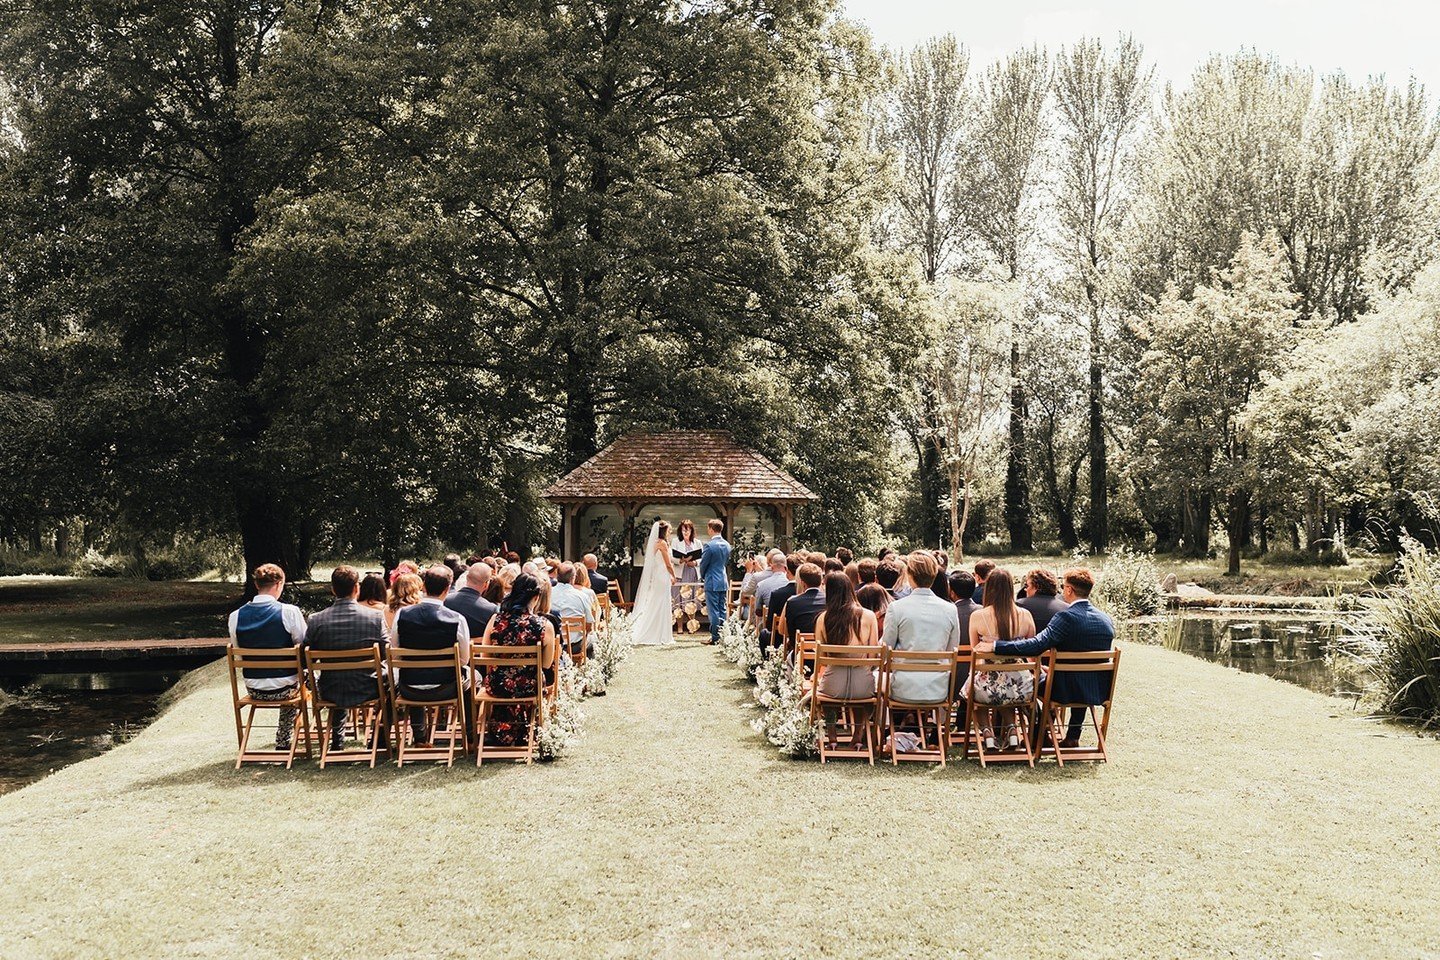 We have to most beautiful spot for your outdoor ceremony. 

Images by @suzyelizabethphotography

#realwedding #cotswold #cotswoldwedding #weddingideas #weddingceremony #ceremony #ido #ourwedding